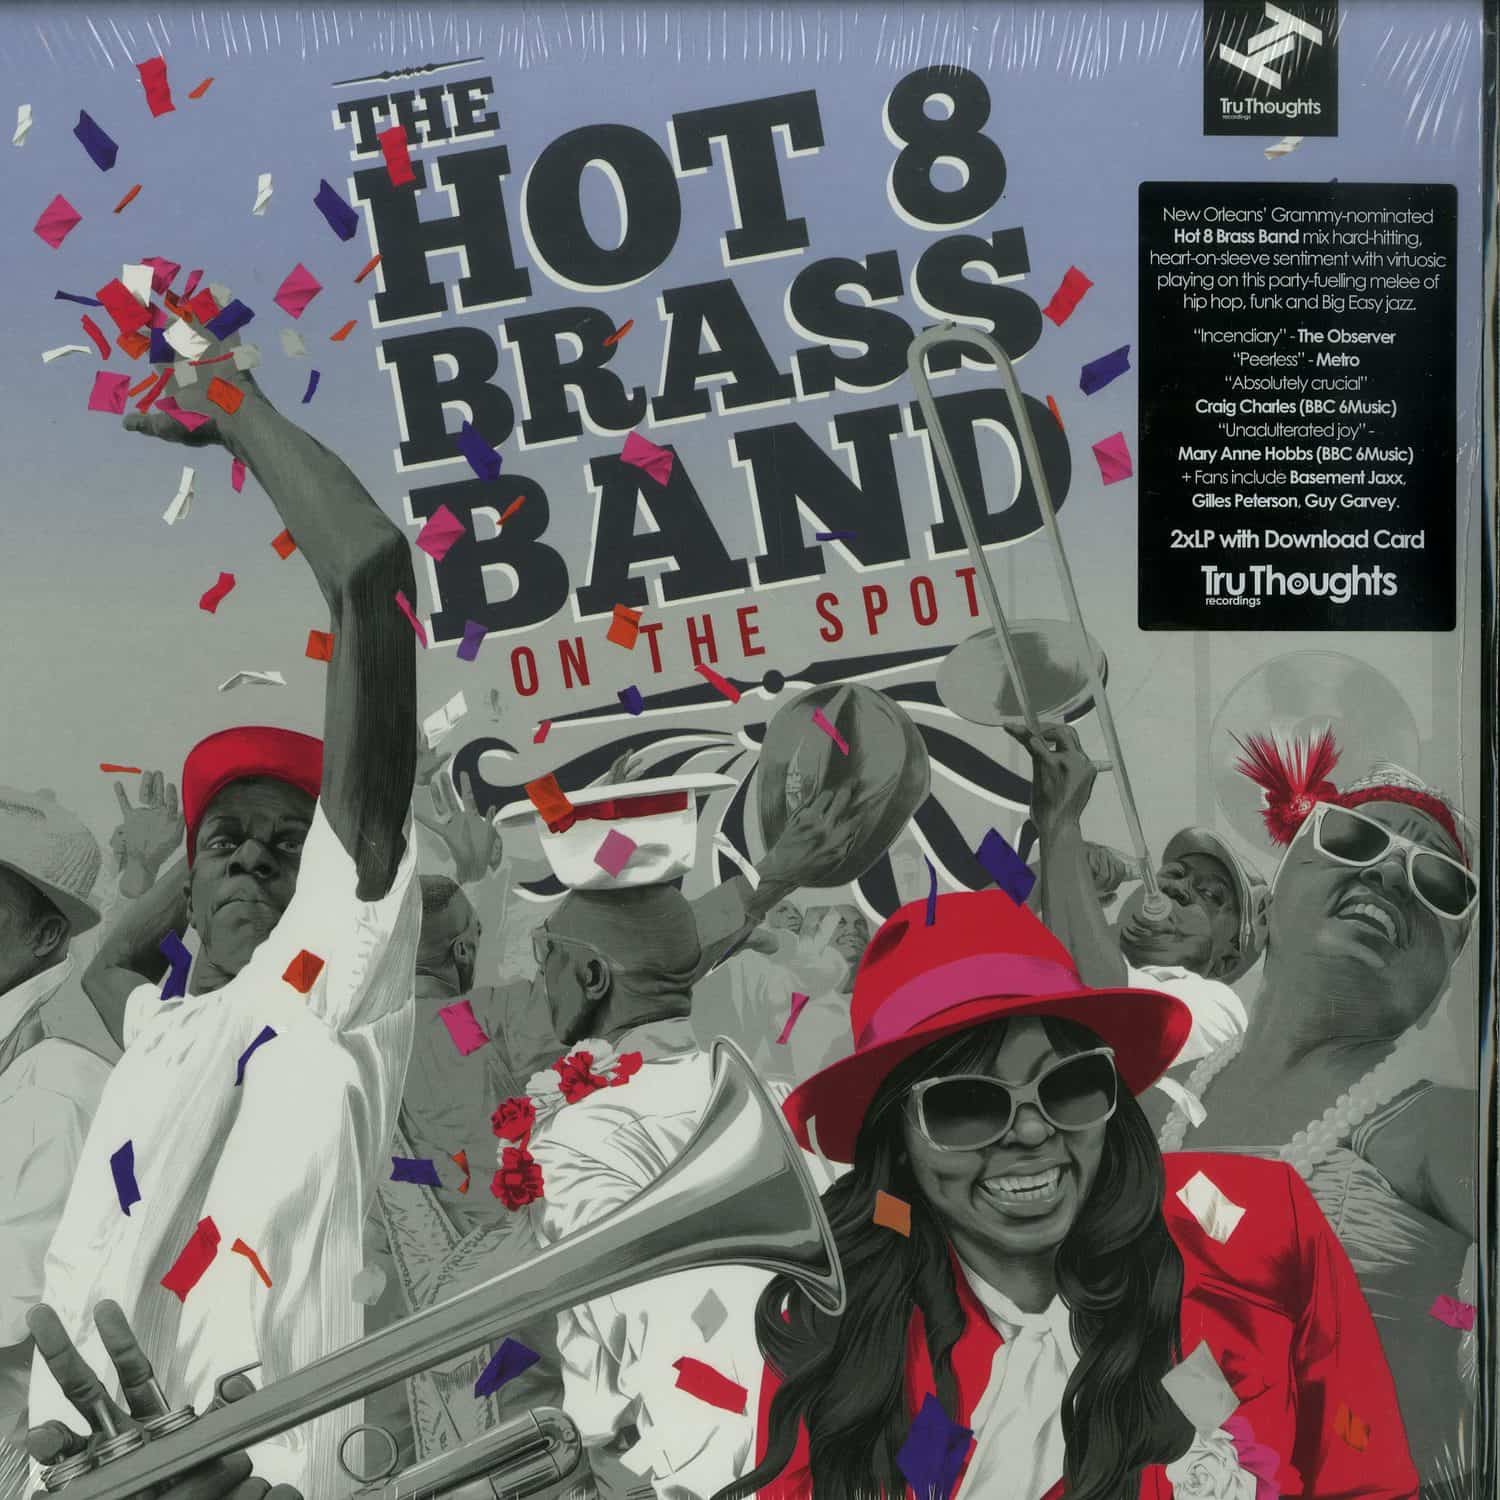 Hot 8 Brass Band - ON THE SPOT 